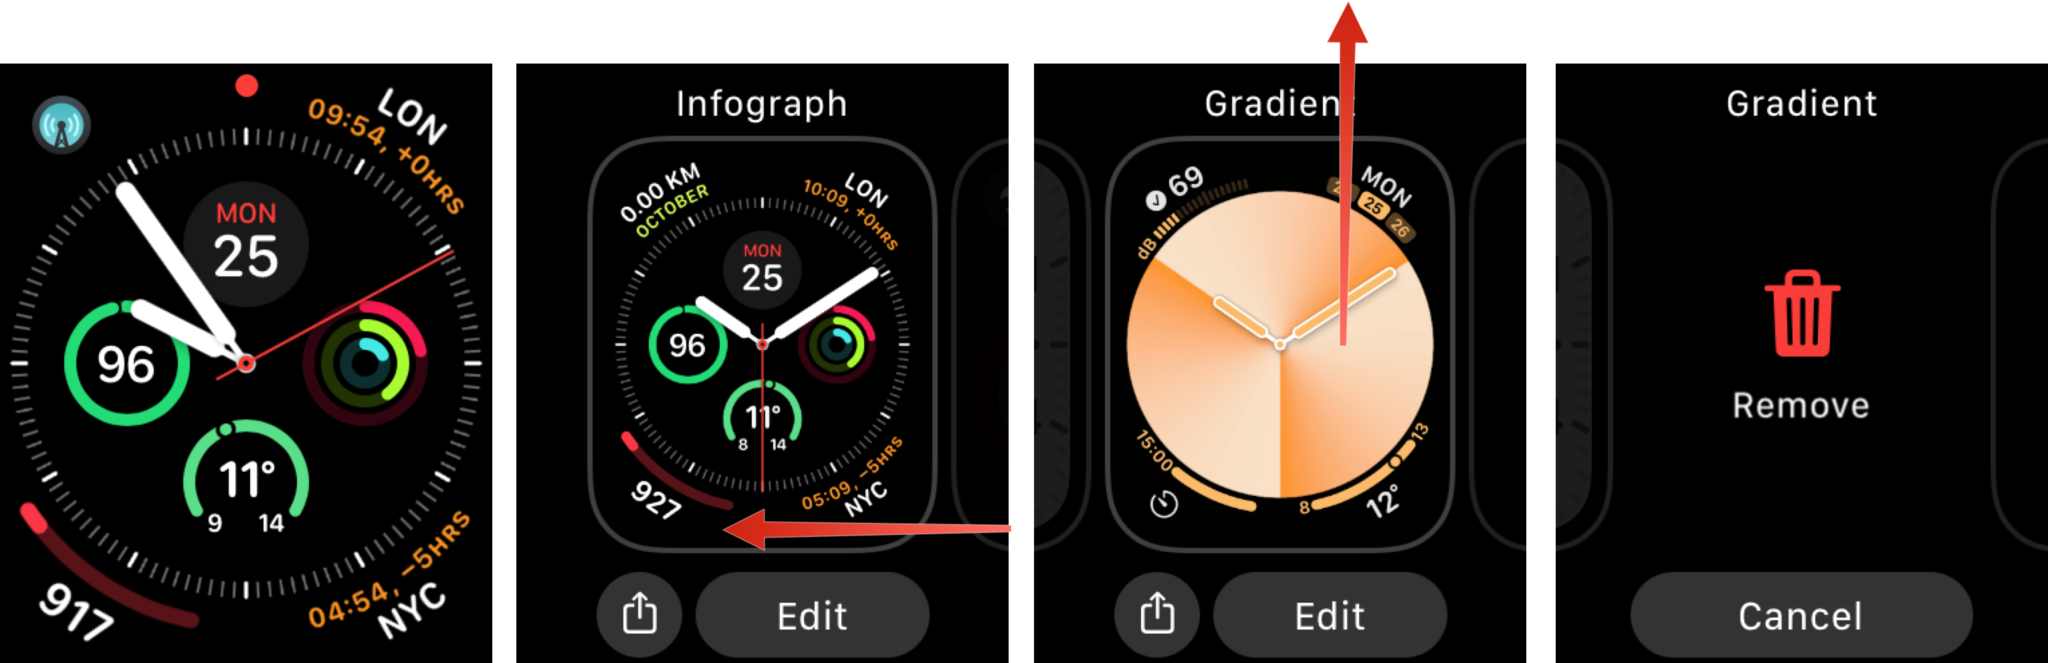 Remove the dial via Apple Watch: long press on the clock dial, swipe left or right to find the clock dial to remove, swipe up on the clock dial to remove, tap Remove